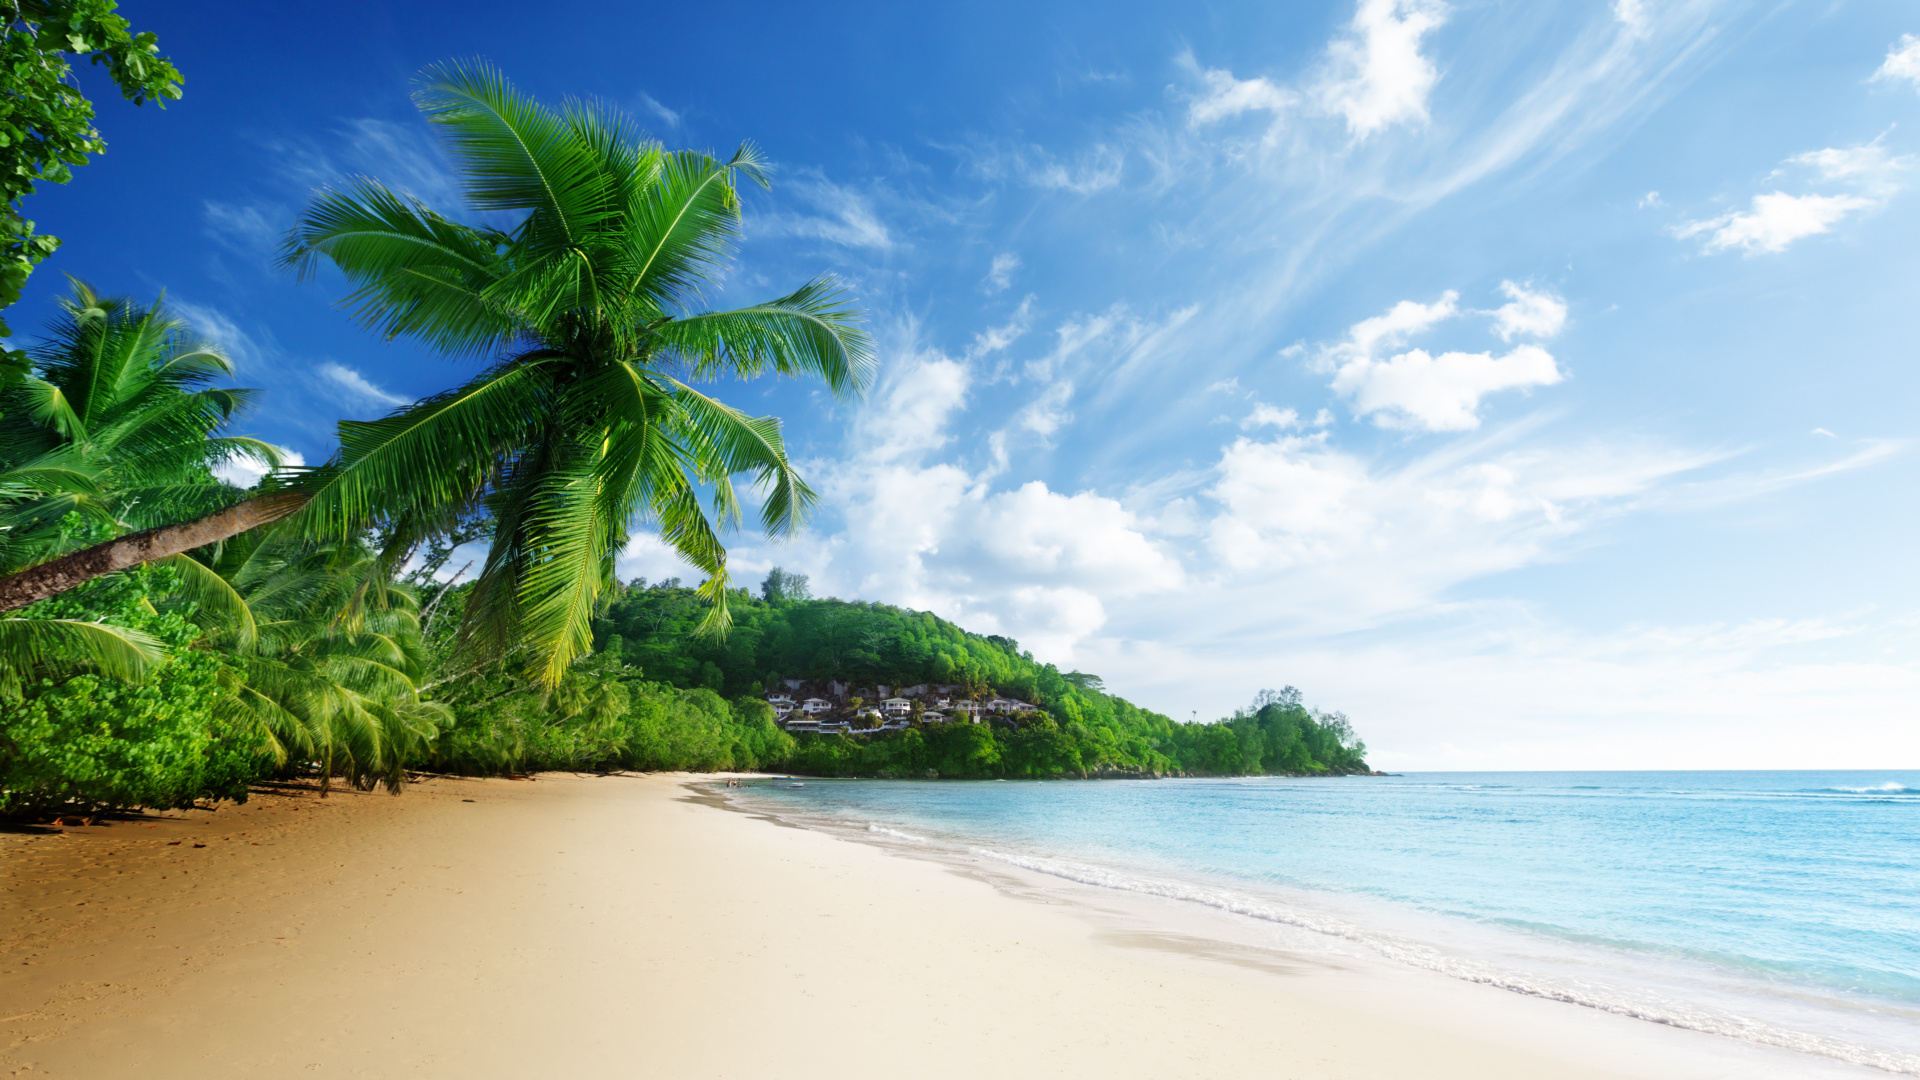 Green Palm Tree on White Sand Beach During Daytime. Wallpaper in 1920x1080 Resolution